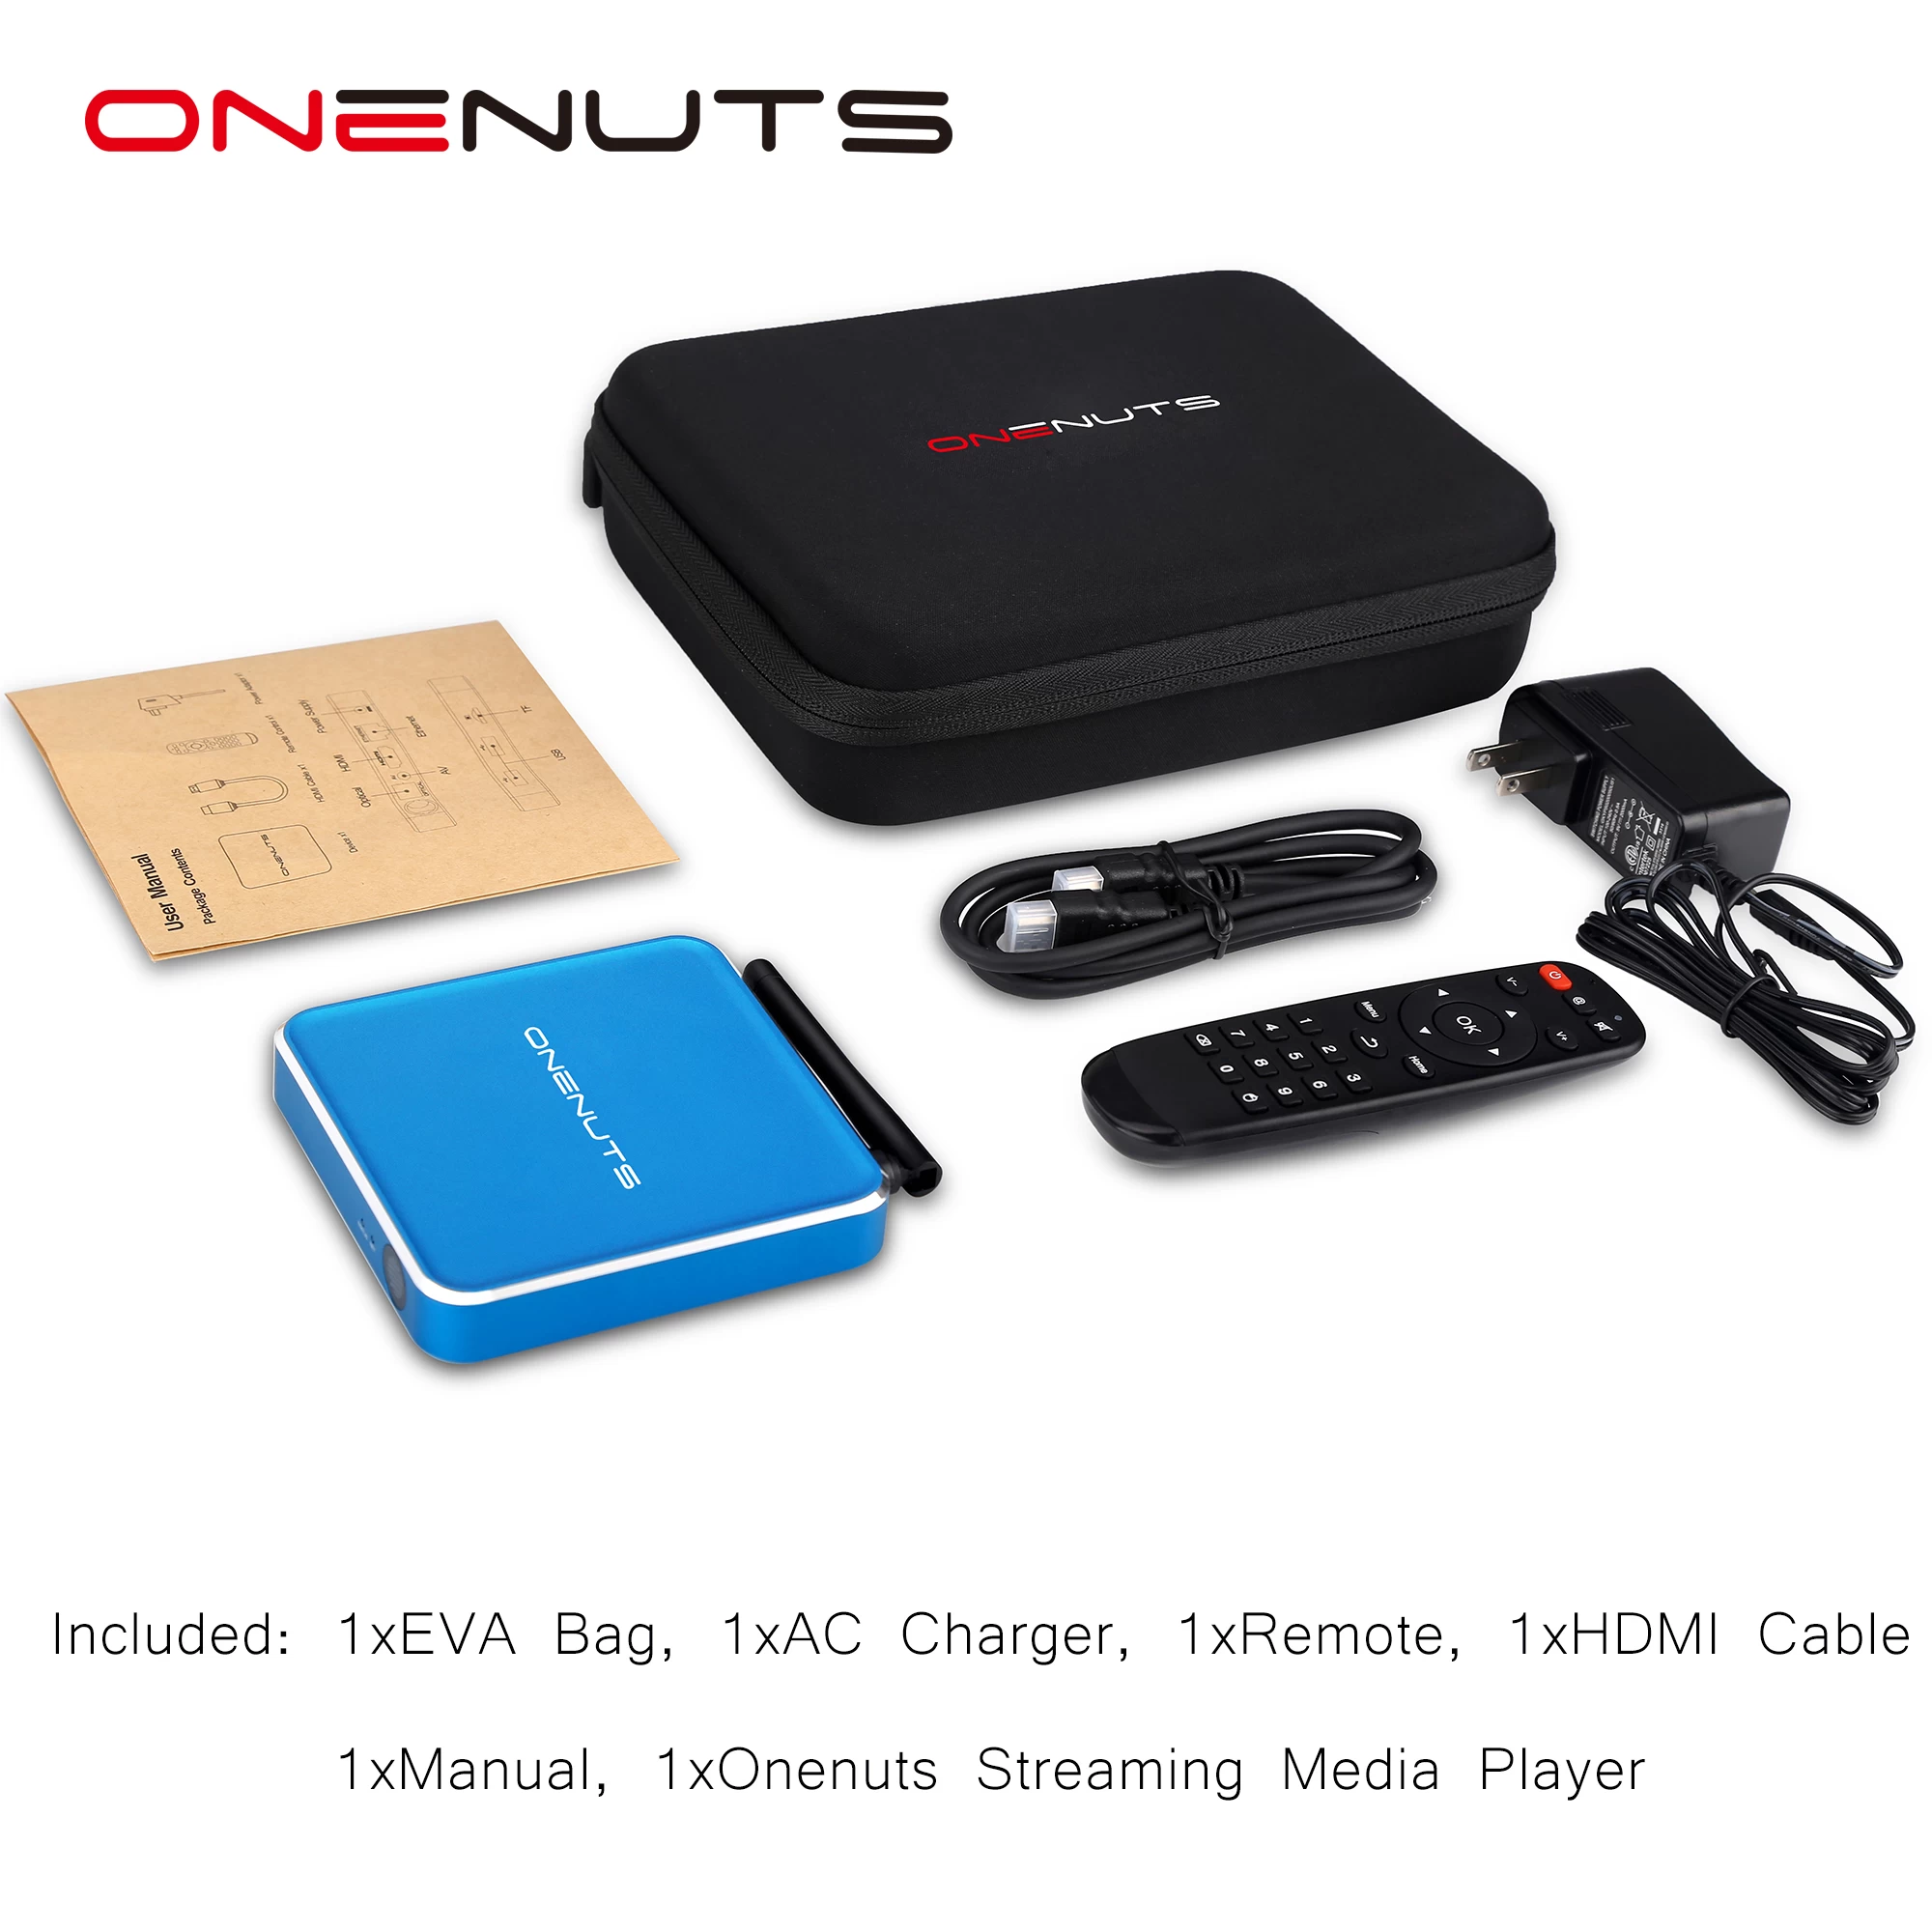 Android IPTV Box Manufacturer Android TV BOX with 3G/4G LTE WCDMA Wireless Module built-in